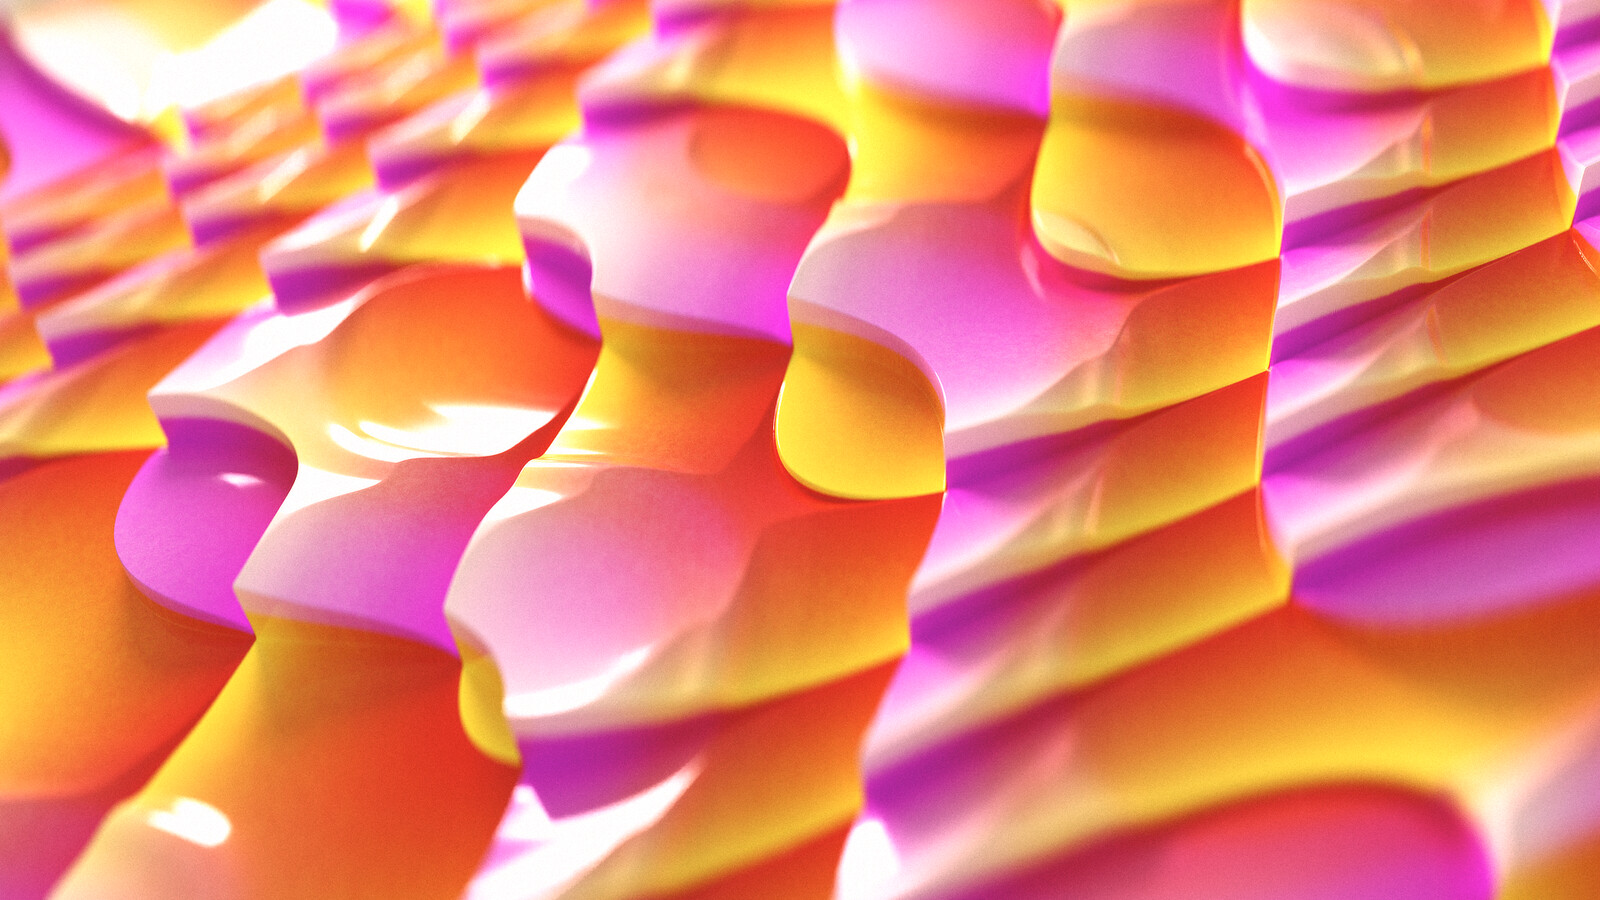 Experimental displacement map made with gradients.